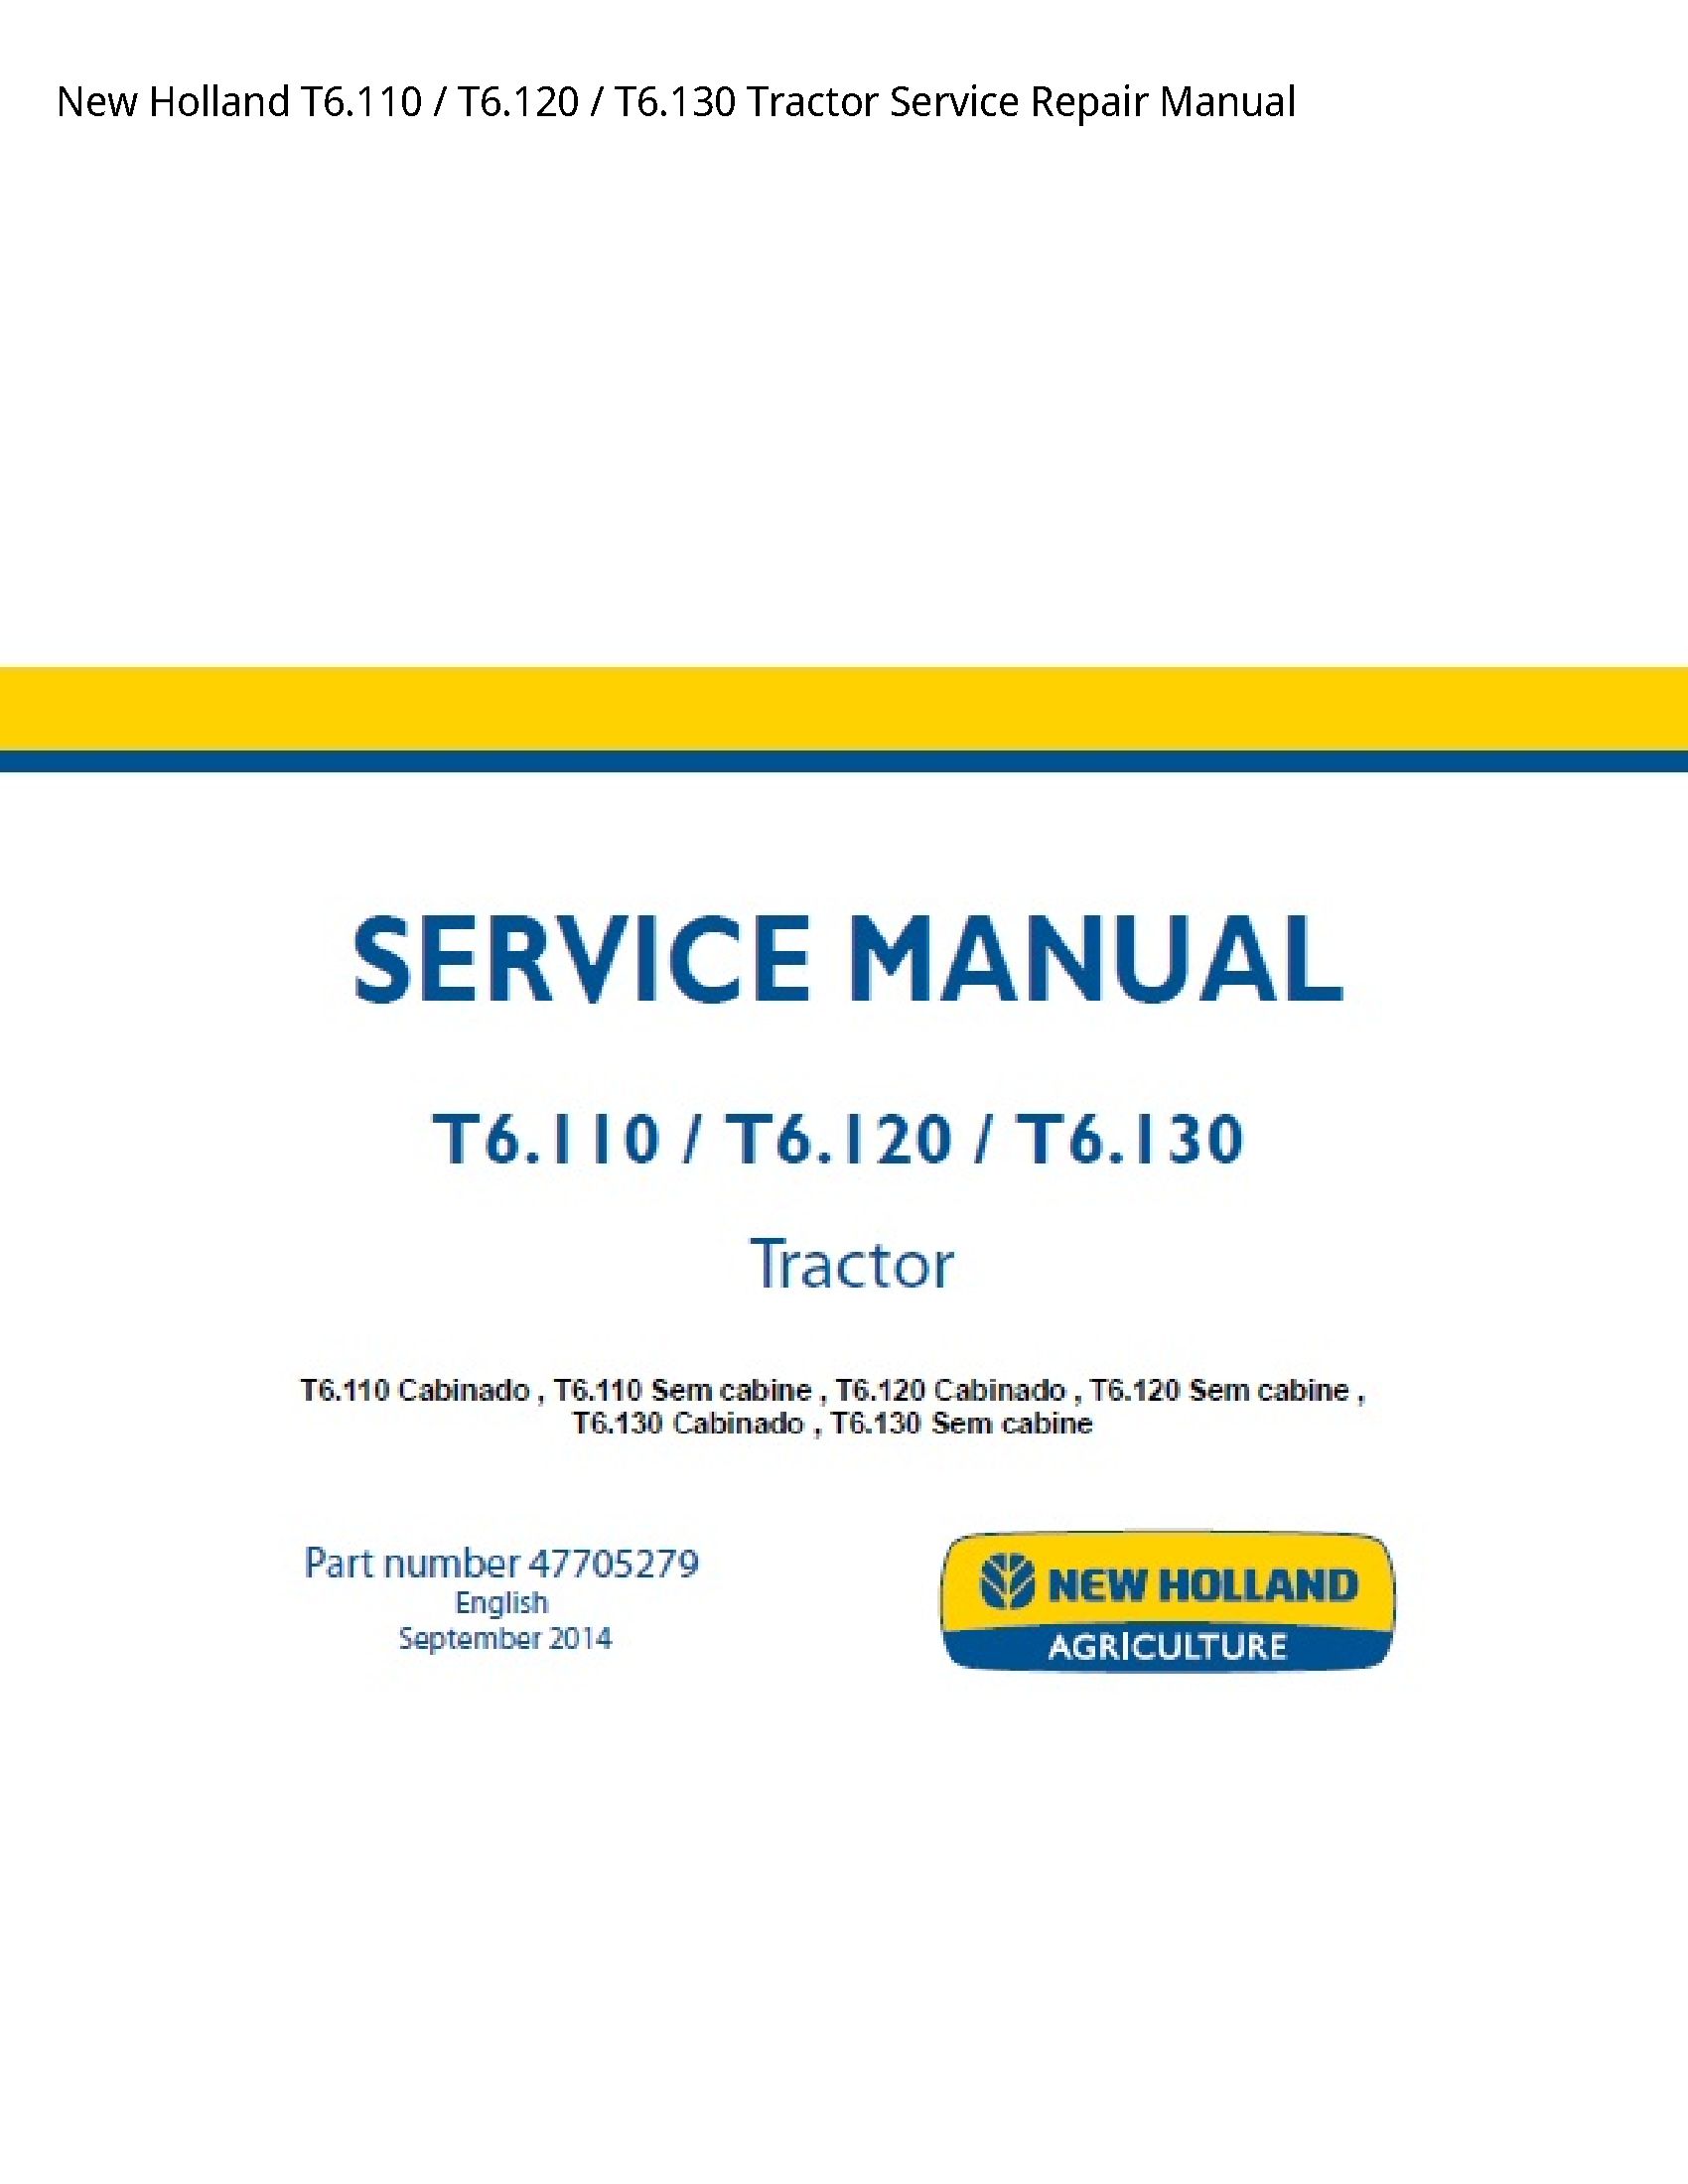 New Holland T6.110 Tractor manual